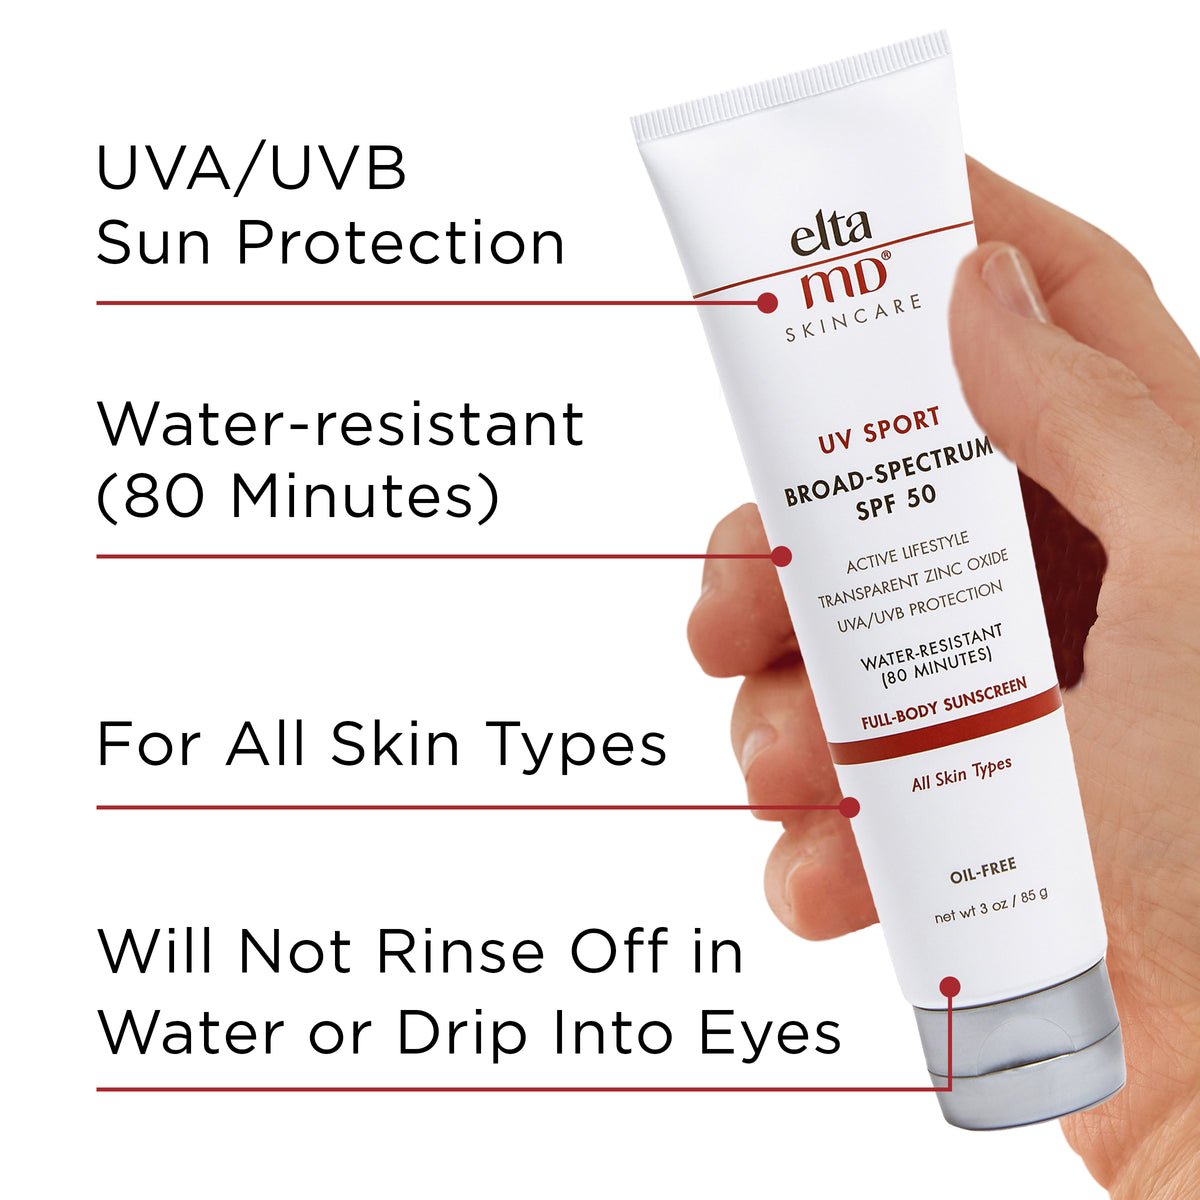 UV Sport Broad-Spectrum SPF 50 - Tube (3 oz.) - The Look and Co